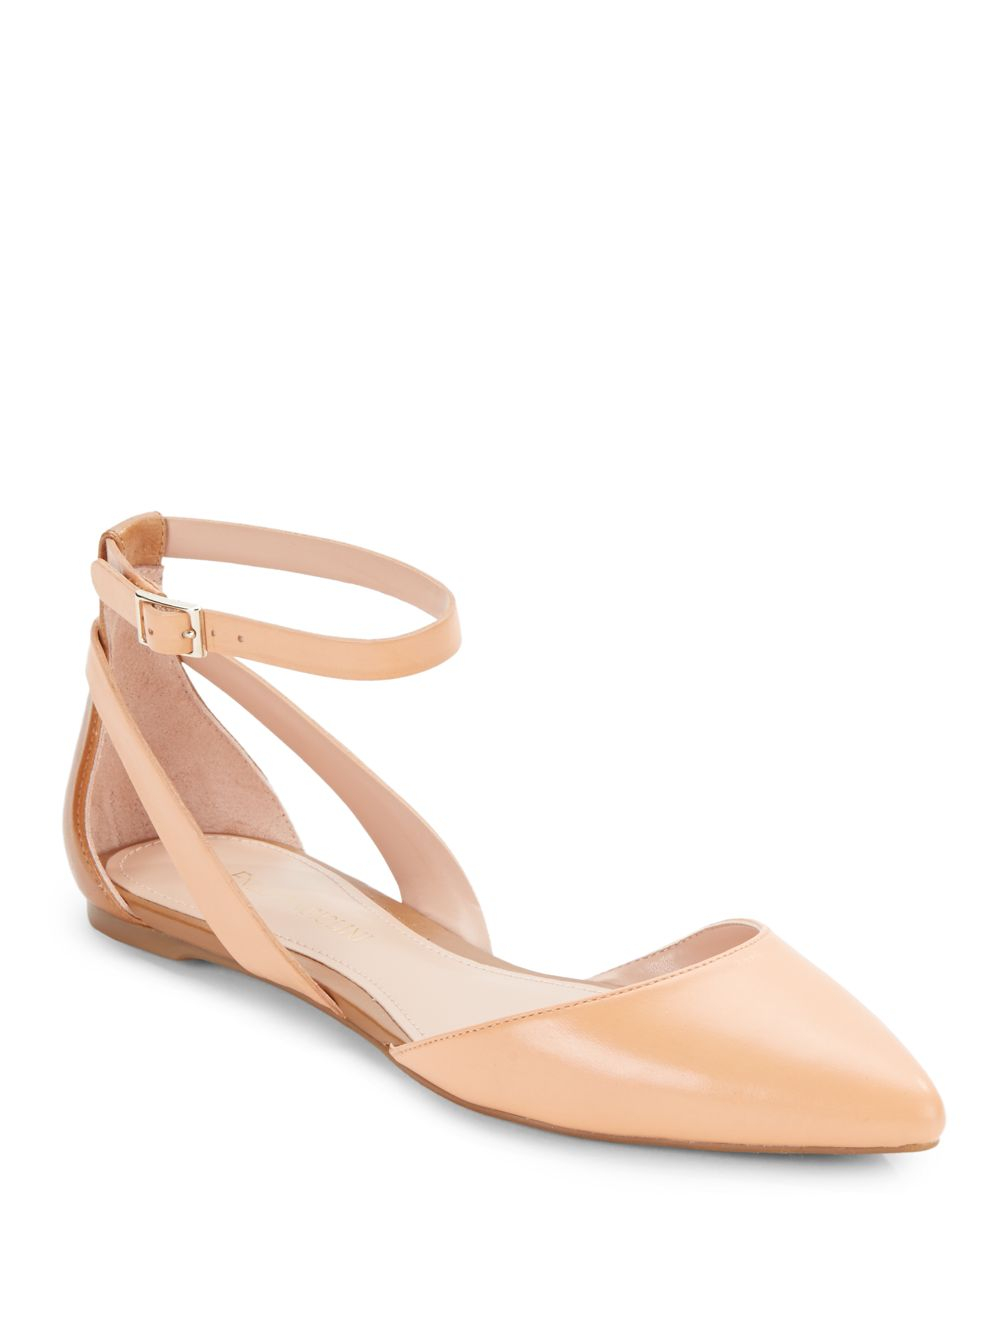 Lyst - Enzo Angiolini Leather D'Orsay Ankle-Strap Flats in Natural